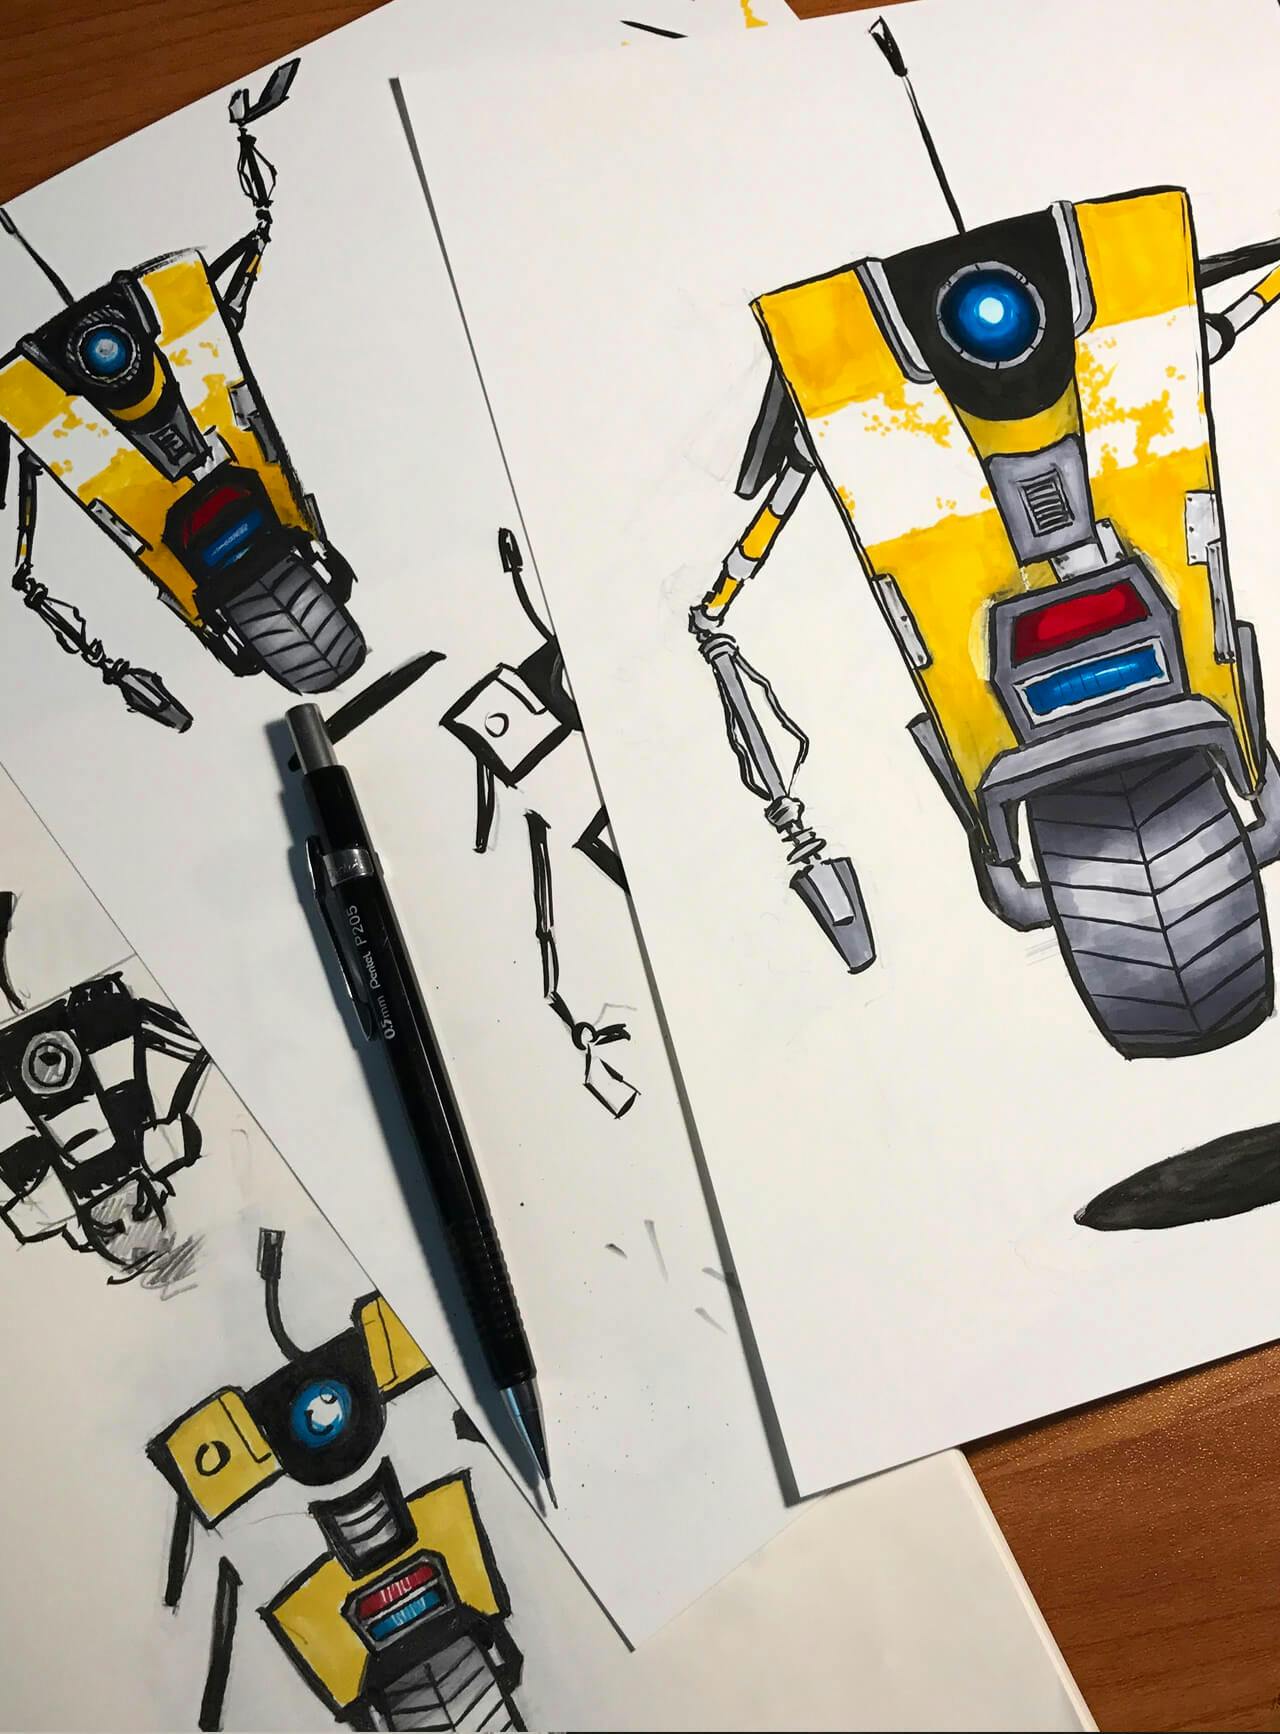 Drawings of ClapTrap from the Borderlands video game franchise